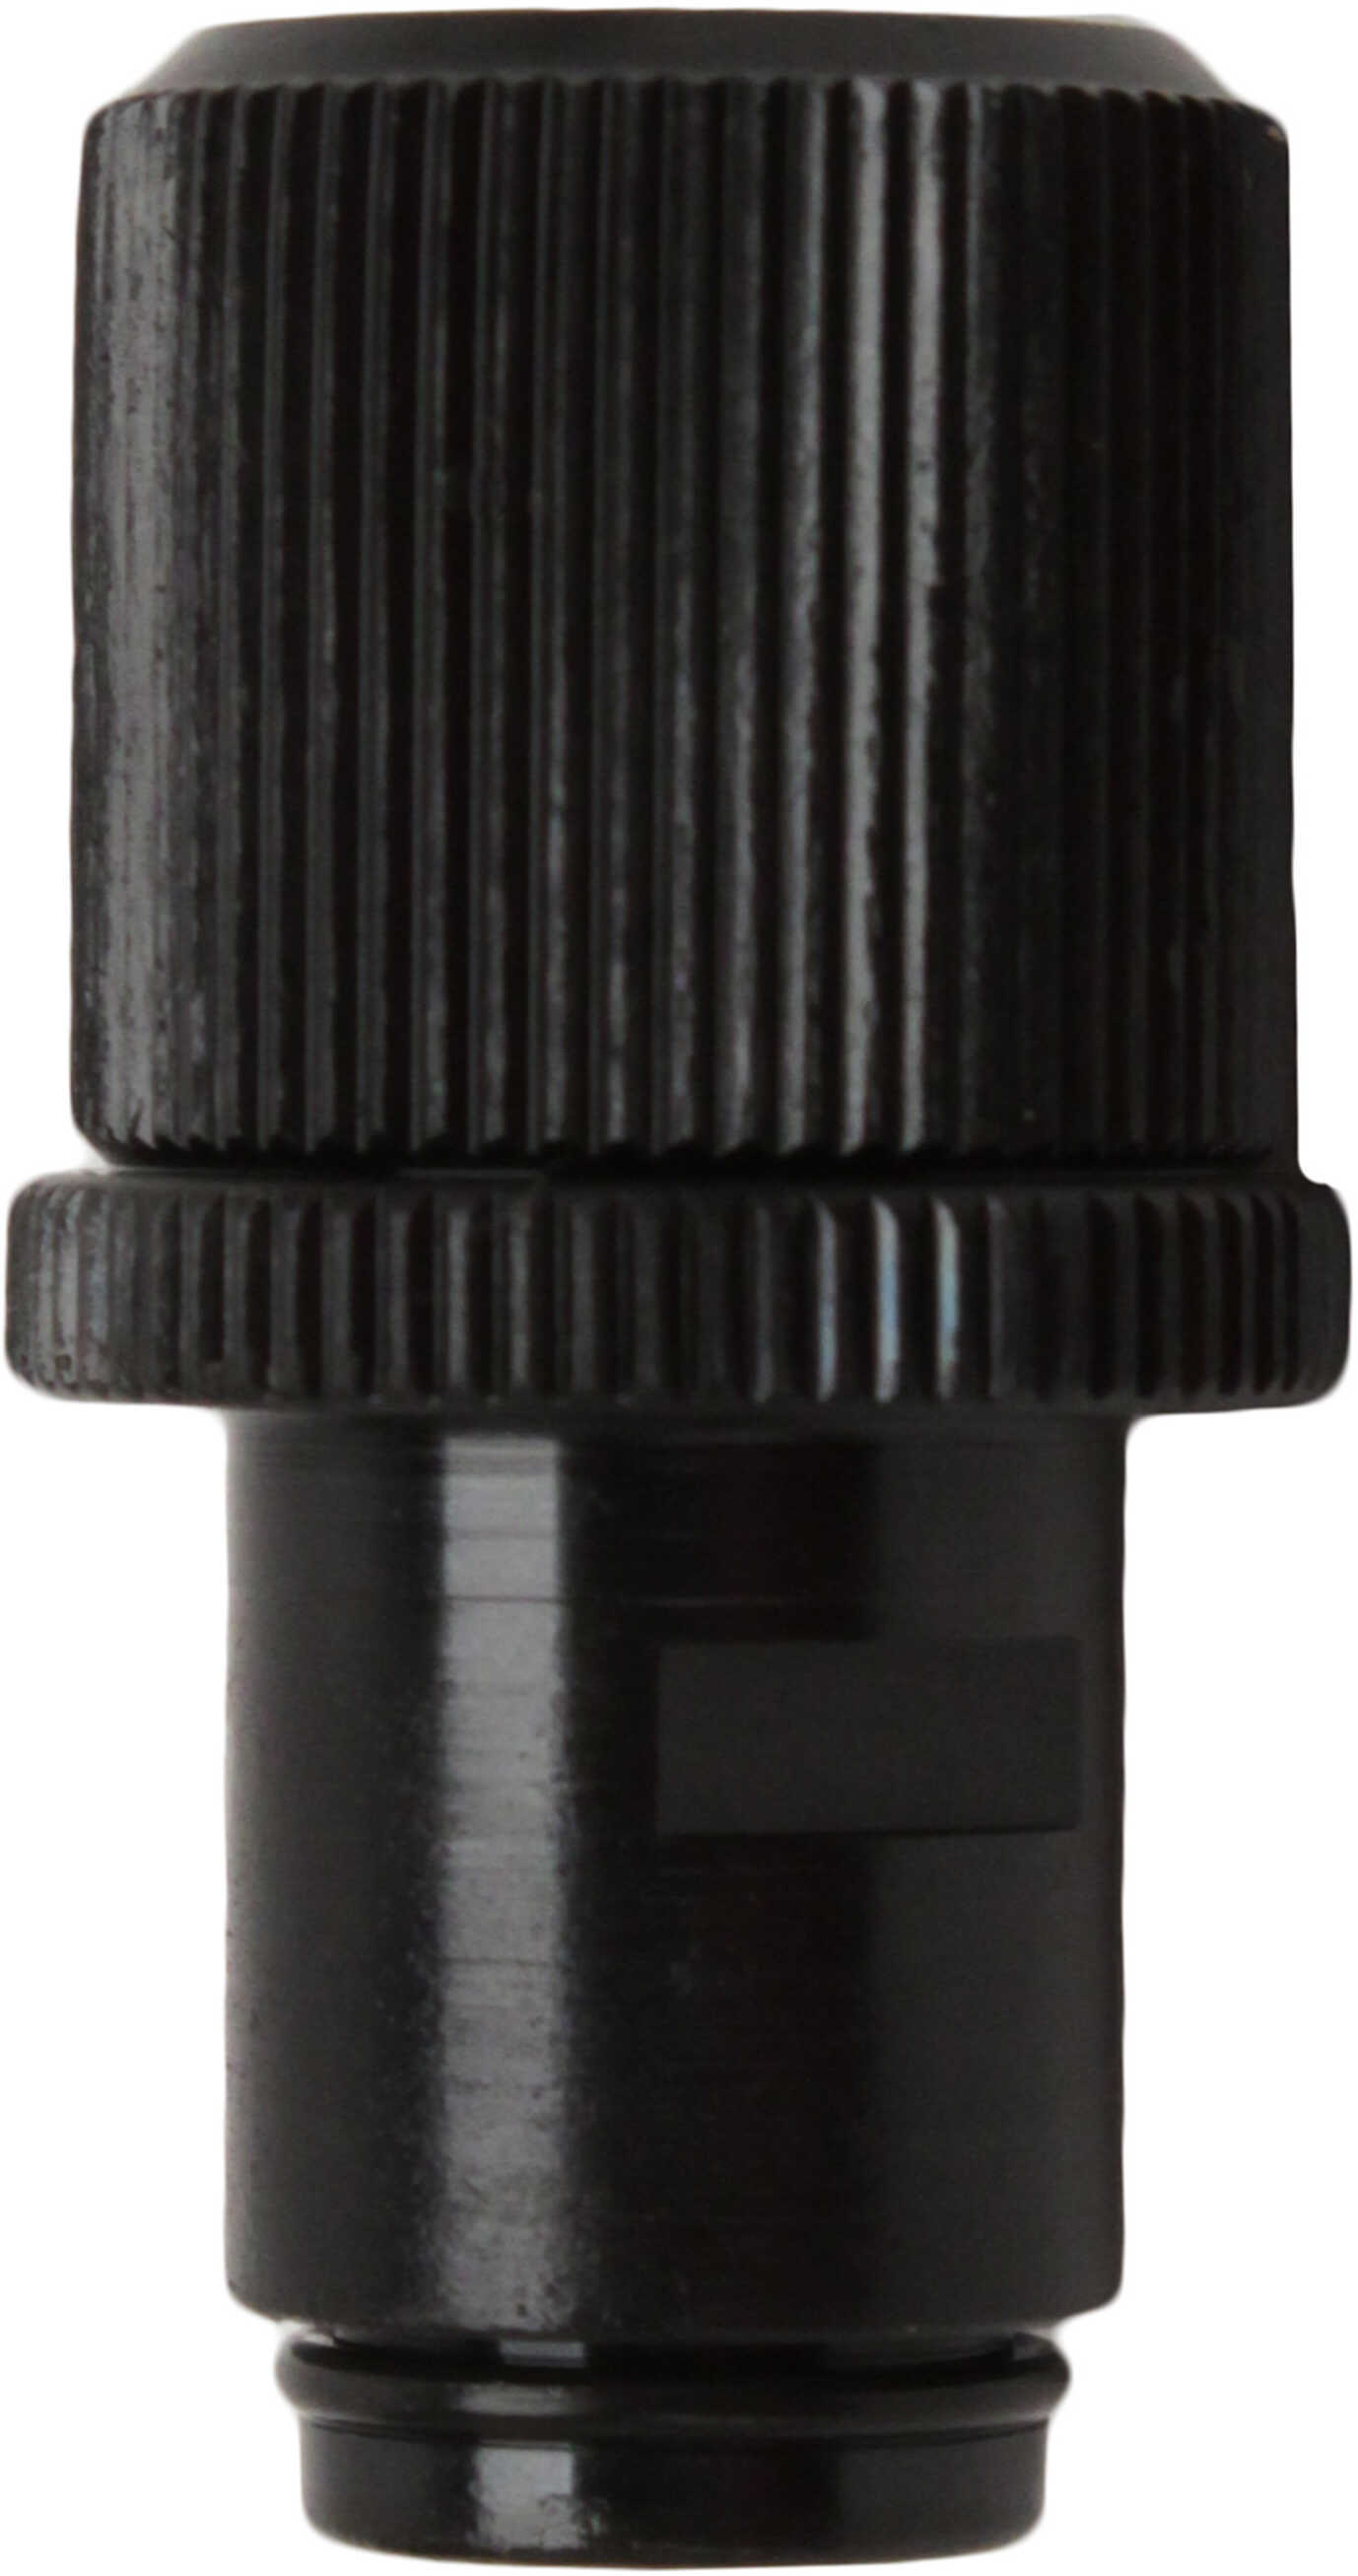 Walther Arms P22 Threaded Barrel Adapter 512105-img-1